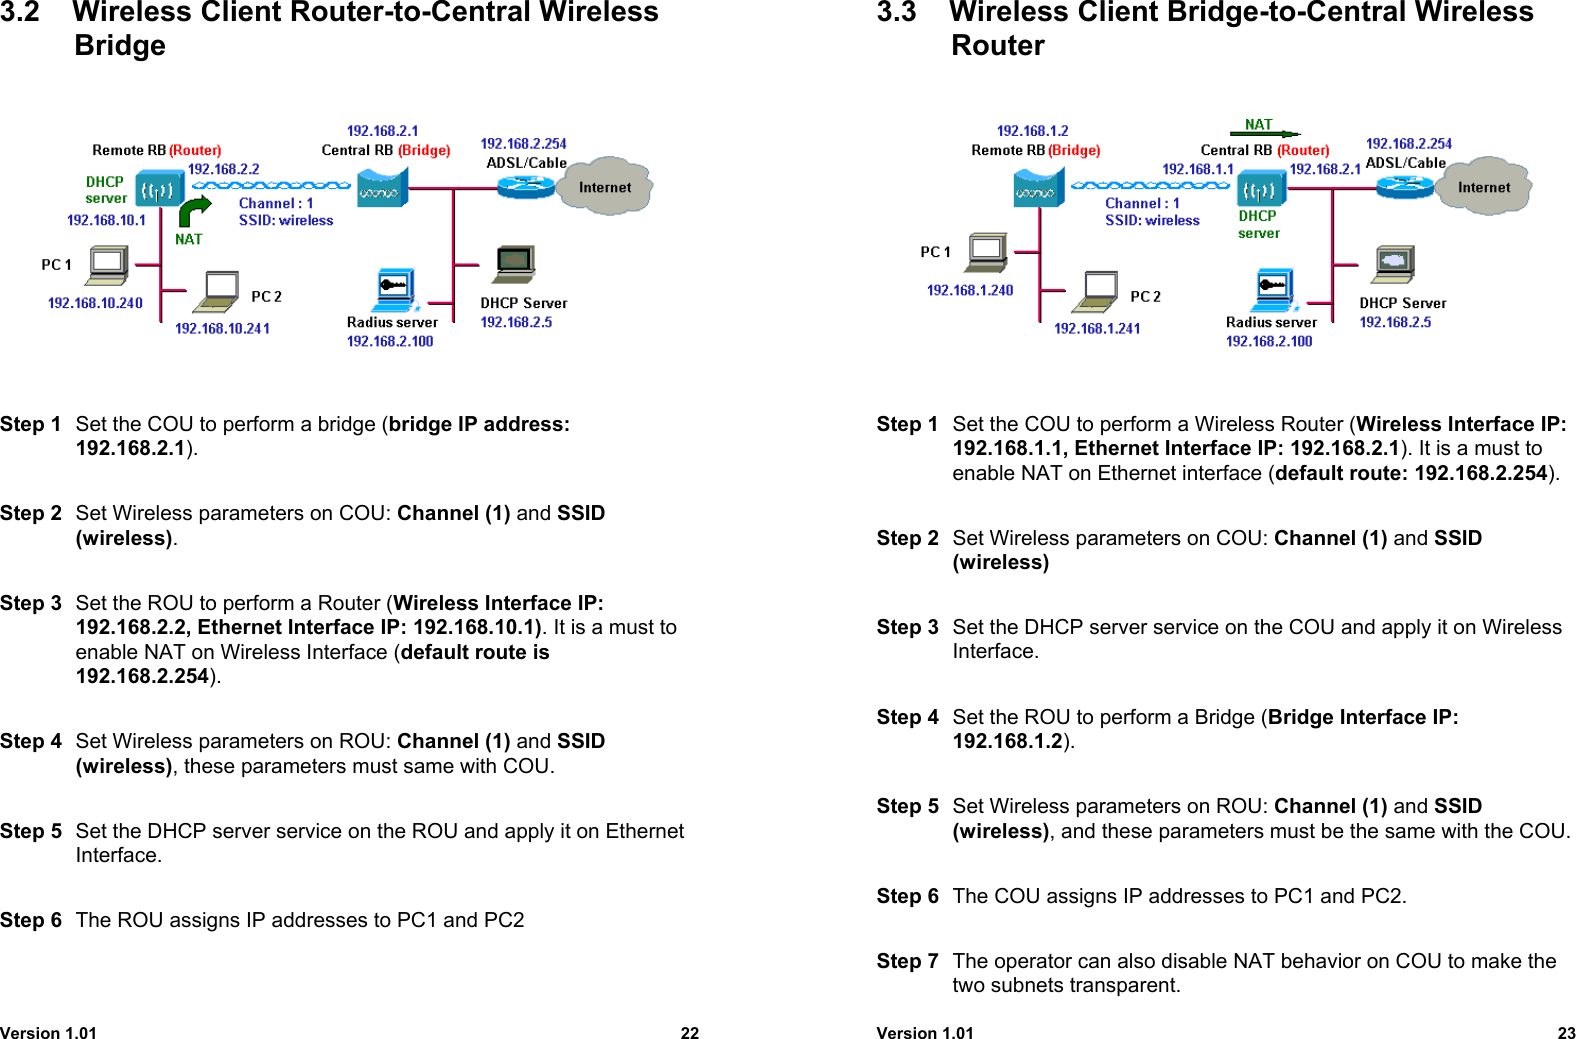 Version 1.01 223.2  Wireless Client Router-to-Central WirelessBridgeStep 1 Set the COU to perform a bridge (bridge IP address:192.168.2.1).Step 2 Set Wireless parameters on COU: Channel (1) and SSID(wireless).Step 3 Set the ROU to perform a Router (Wireless Interface IP:192.168.2.2, Ethernet Interface IP: 192.168.10.1). It is a must toenable NAT on Wireless Interface (default route is192.168.2.254).Step 4 Set Wireless parameters on ROU: Channel (1) and SSID(wireless), these parameters must same with COU.Step 5 Set the DHCP server service on the ROU and apply it on EthernetInterface.Step 6 The ROU assigns IP addresses to PC1 and PC2Version 1.01 233.3  Wireless Client Bridge-to-Central WirelessRouterStep 1 Set the COU to perform a Wireless Router (Wireless Interface IP:192.168.1.1, Ethernet Interface IP: 192.168.2.1). It is a must toenable NAT on Ethernet interface (default route: 192.168.2.254).Step 2 Set Wireless parameters on COU: Channel (1) and SSID(wireless)Step 3 Set the DHCP server service on the COU and apply it on WirelessInterface.Step 4 Set the ROU to perform a Bridge (Bridge Interface IP:192.168.1.2).Step 5 Set Wireless parameters on ROU: Channel (1) and SSID(wireless), and these parameters must be the same with the COU.Step 6 The COU assigns IP addresses to PC1 and PC2.Step 7 The operator can also disable NAT behavior on COU to make thetwo subnets transparent.